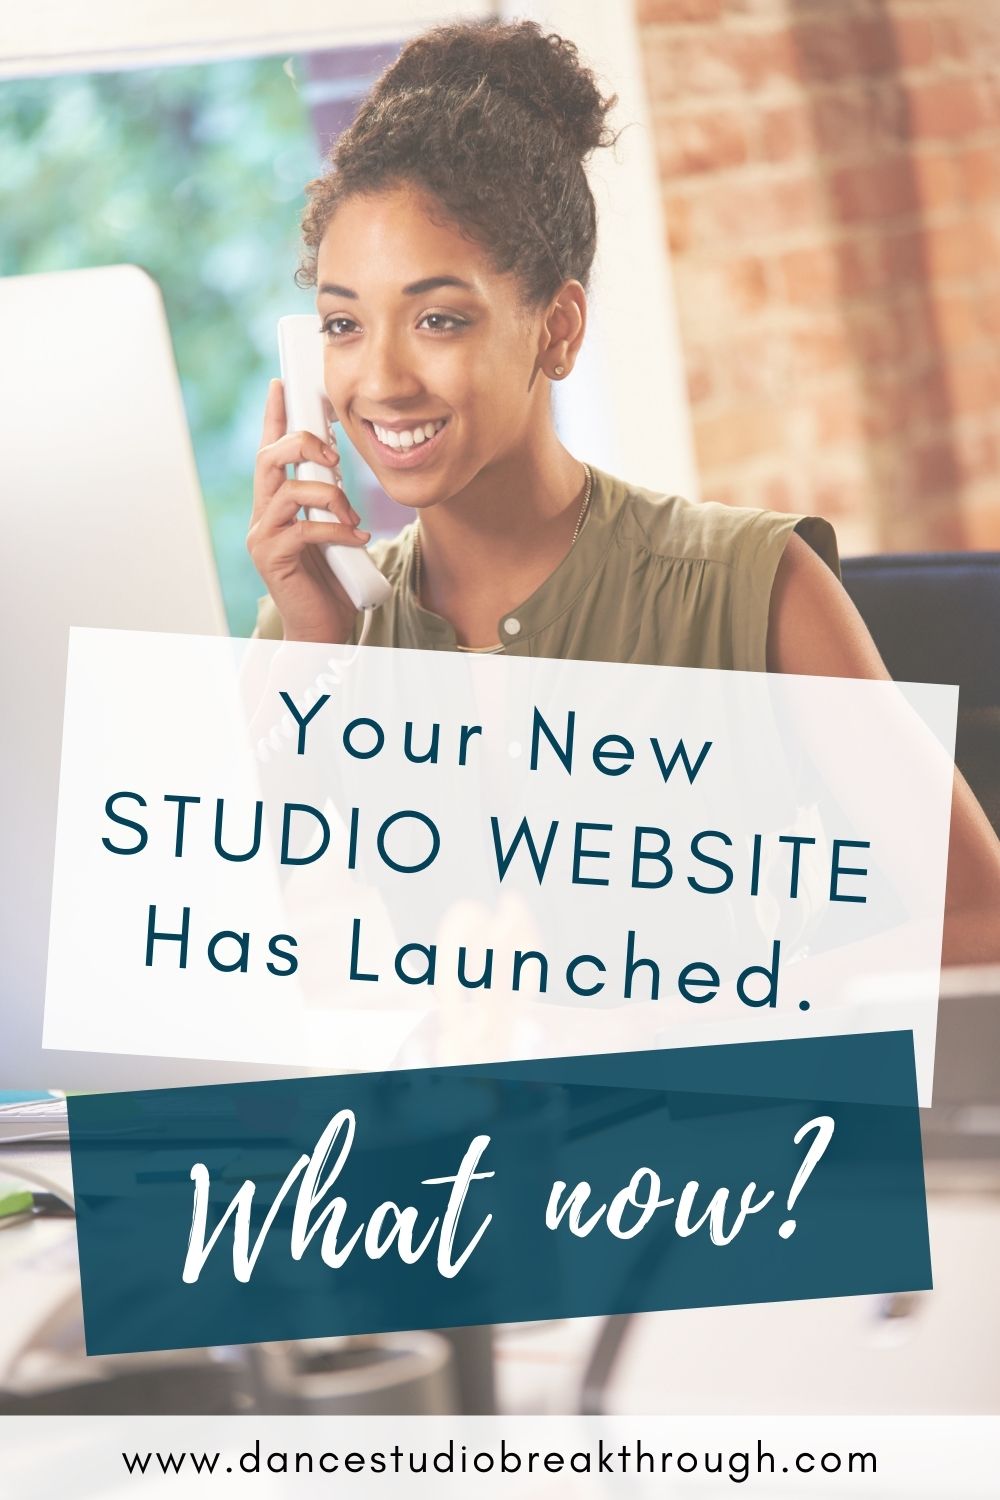 Top 4 Things You Should Do After Your Dance Studio Website Has Launched